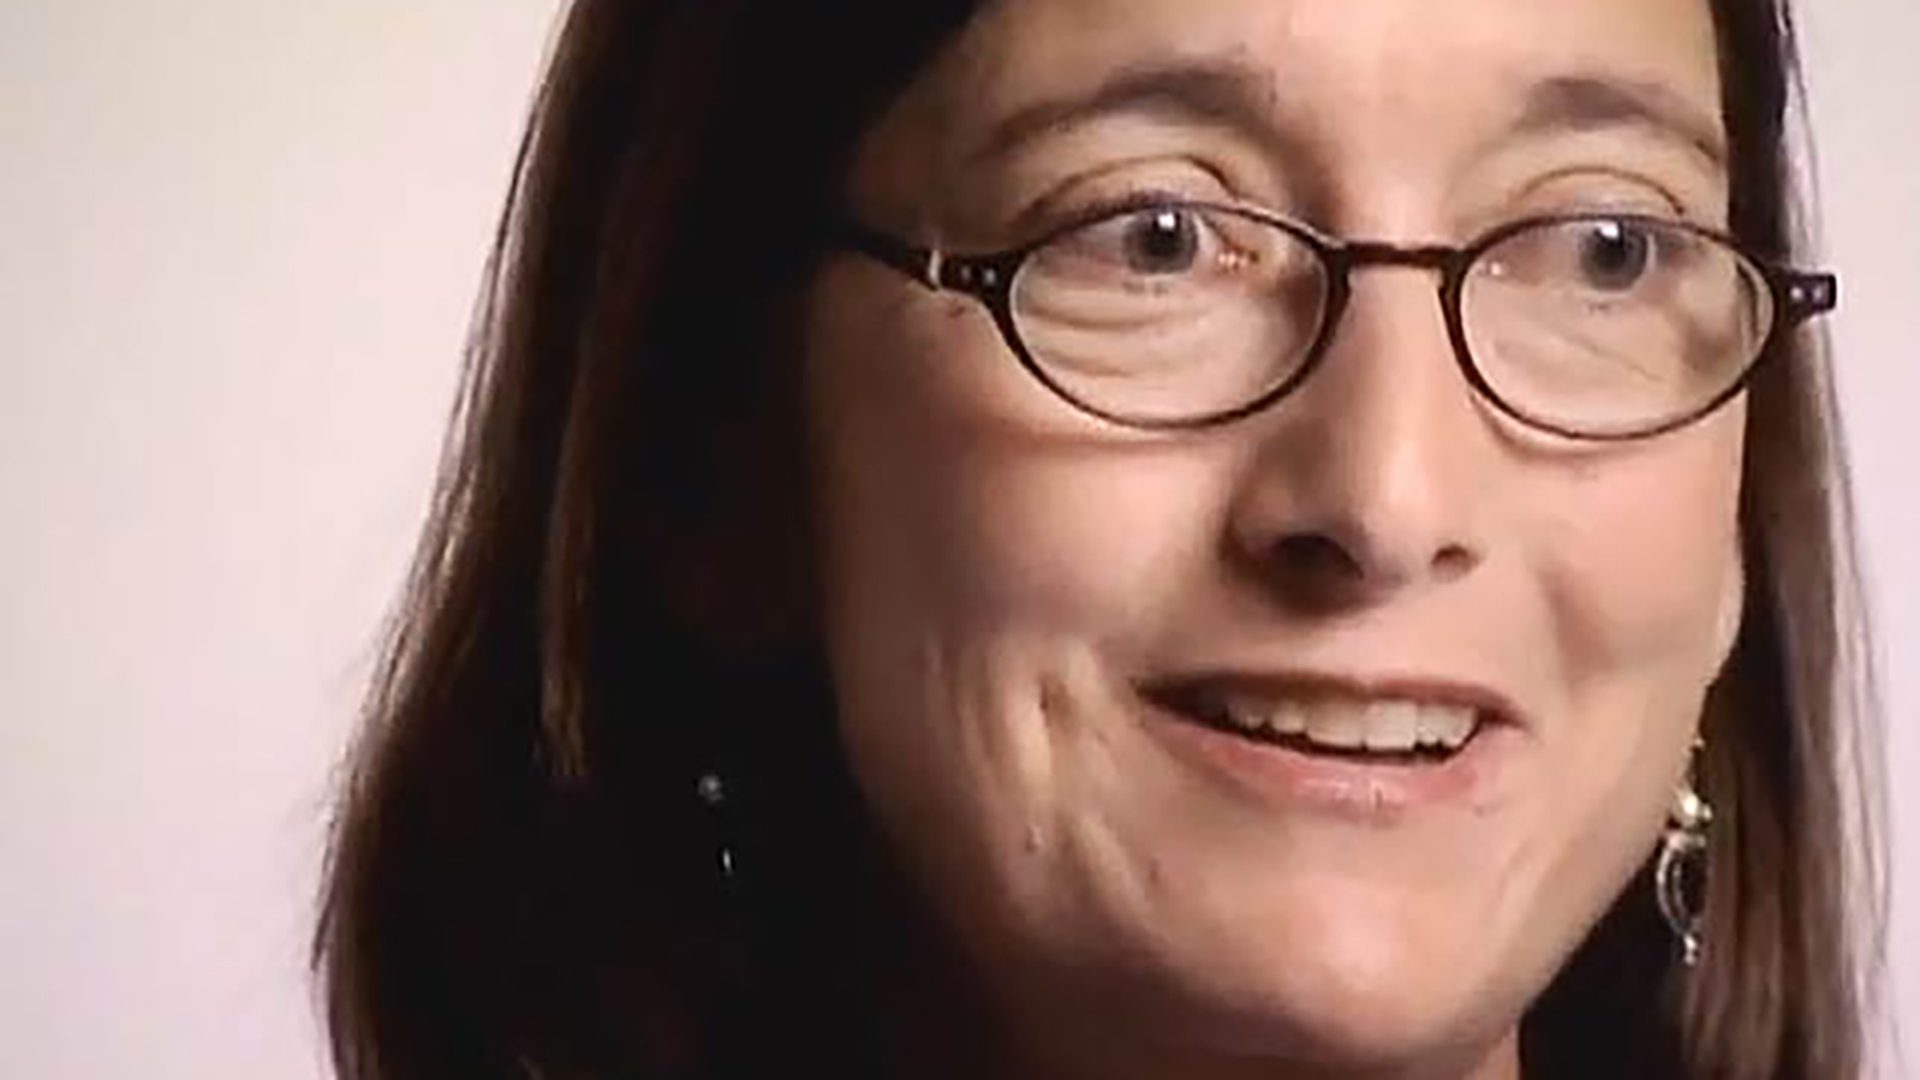 A close-up of an adult woman with dark hair and glasses being interviewed against a light background.